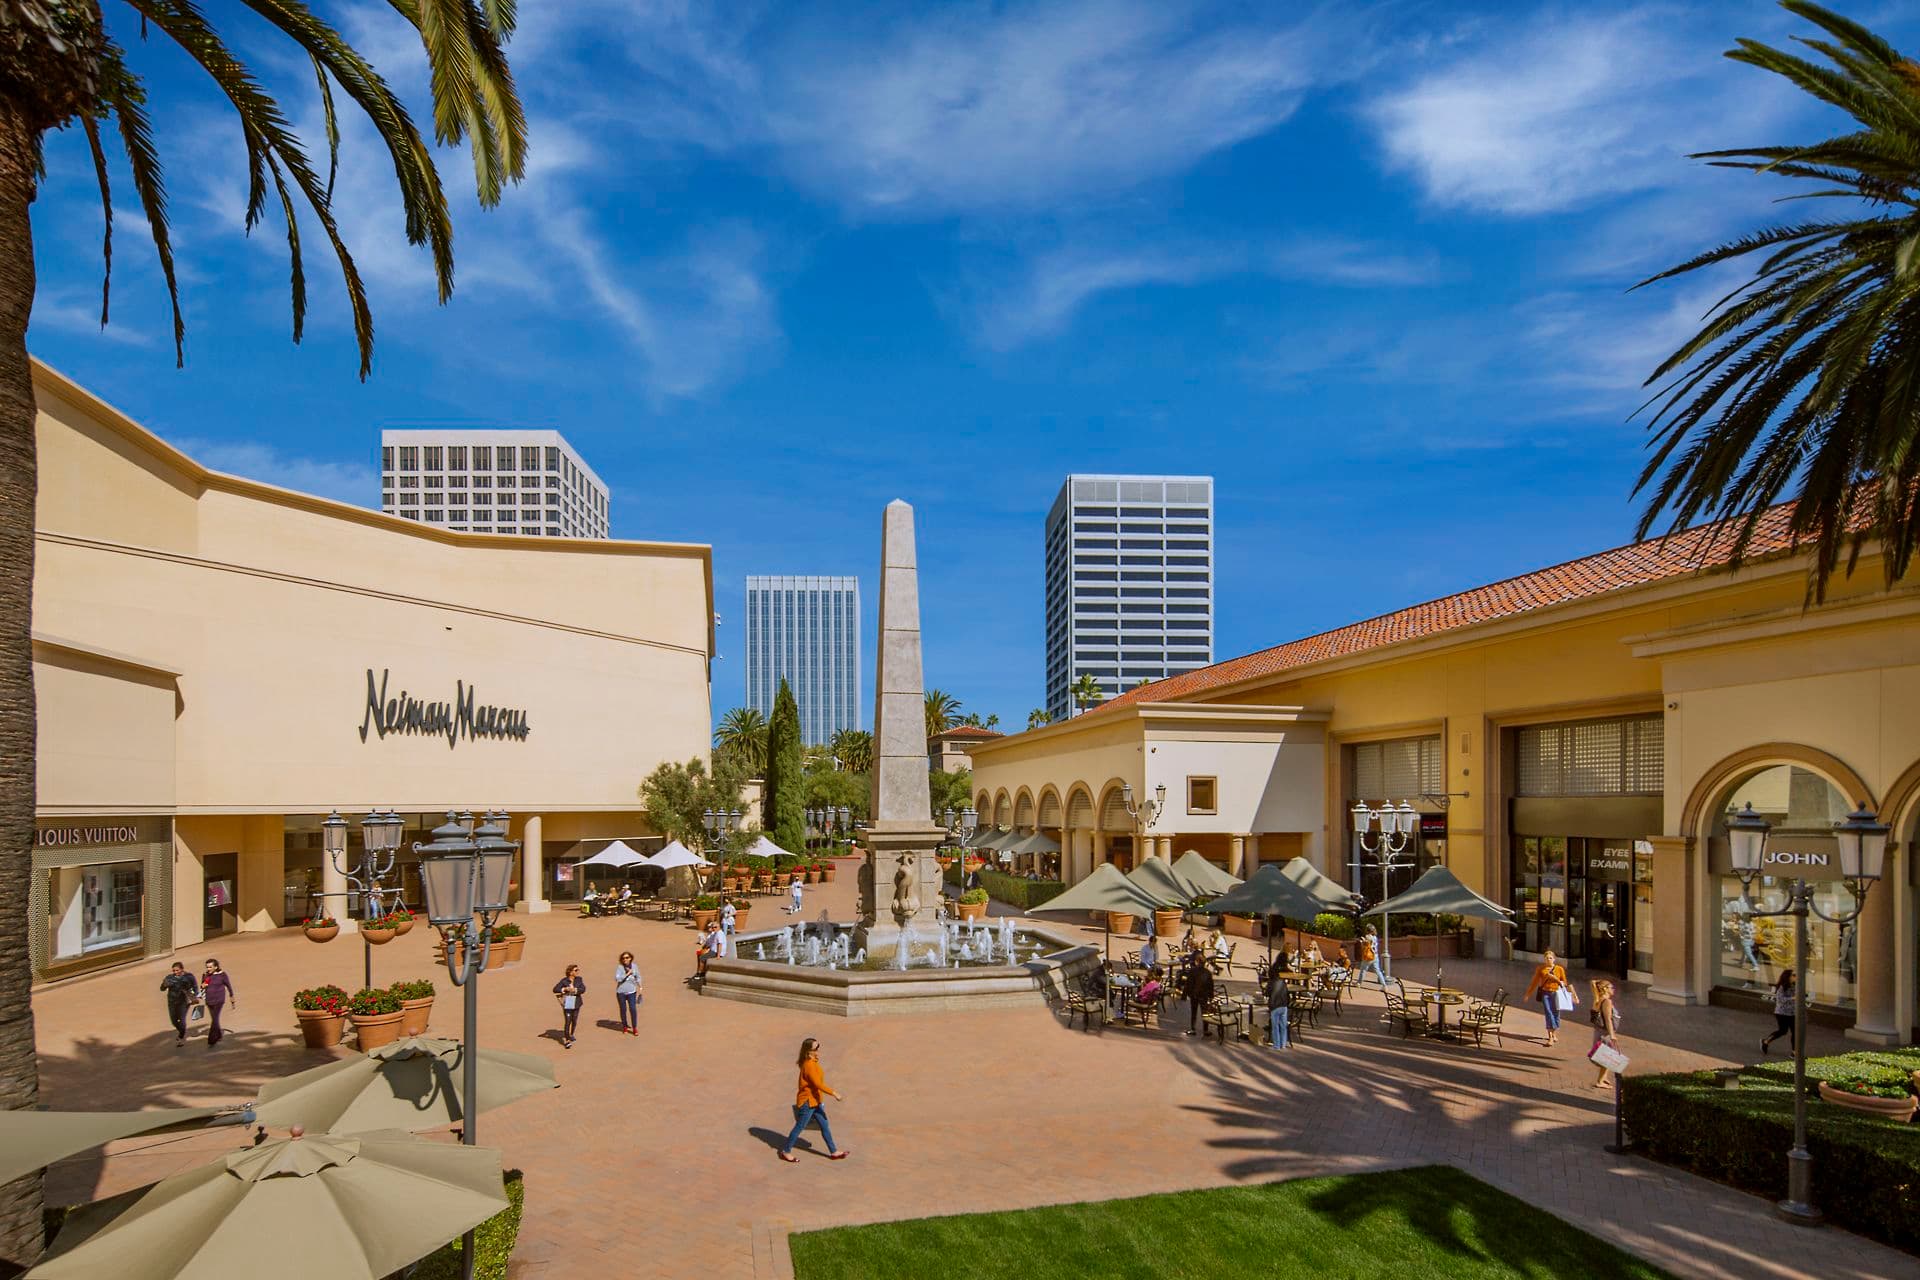 Aerial view of the Neiman Marcus-Bloomingdale's courtyard at Fashion Island in Newport Beach, CA.